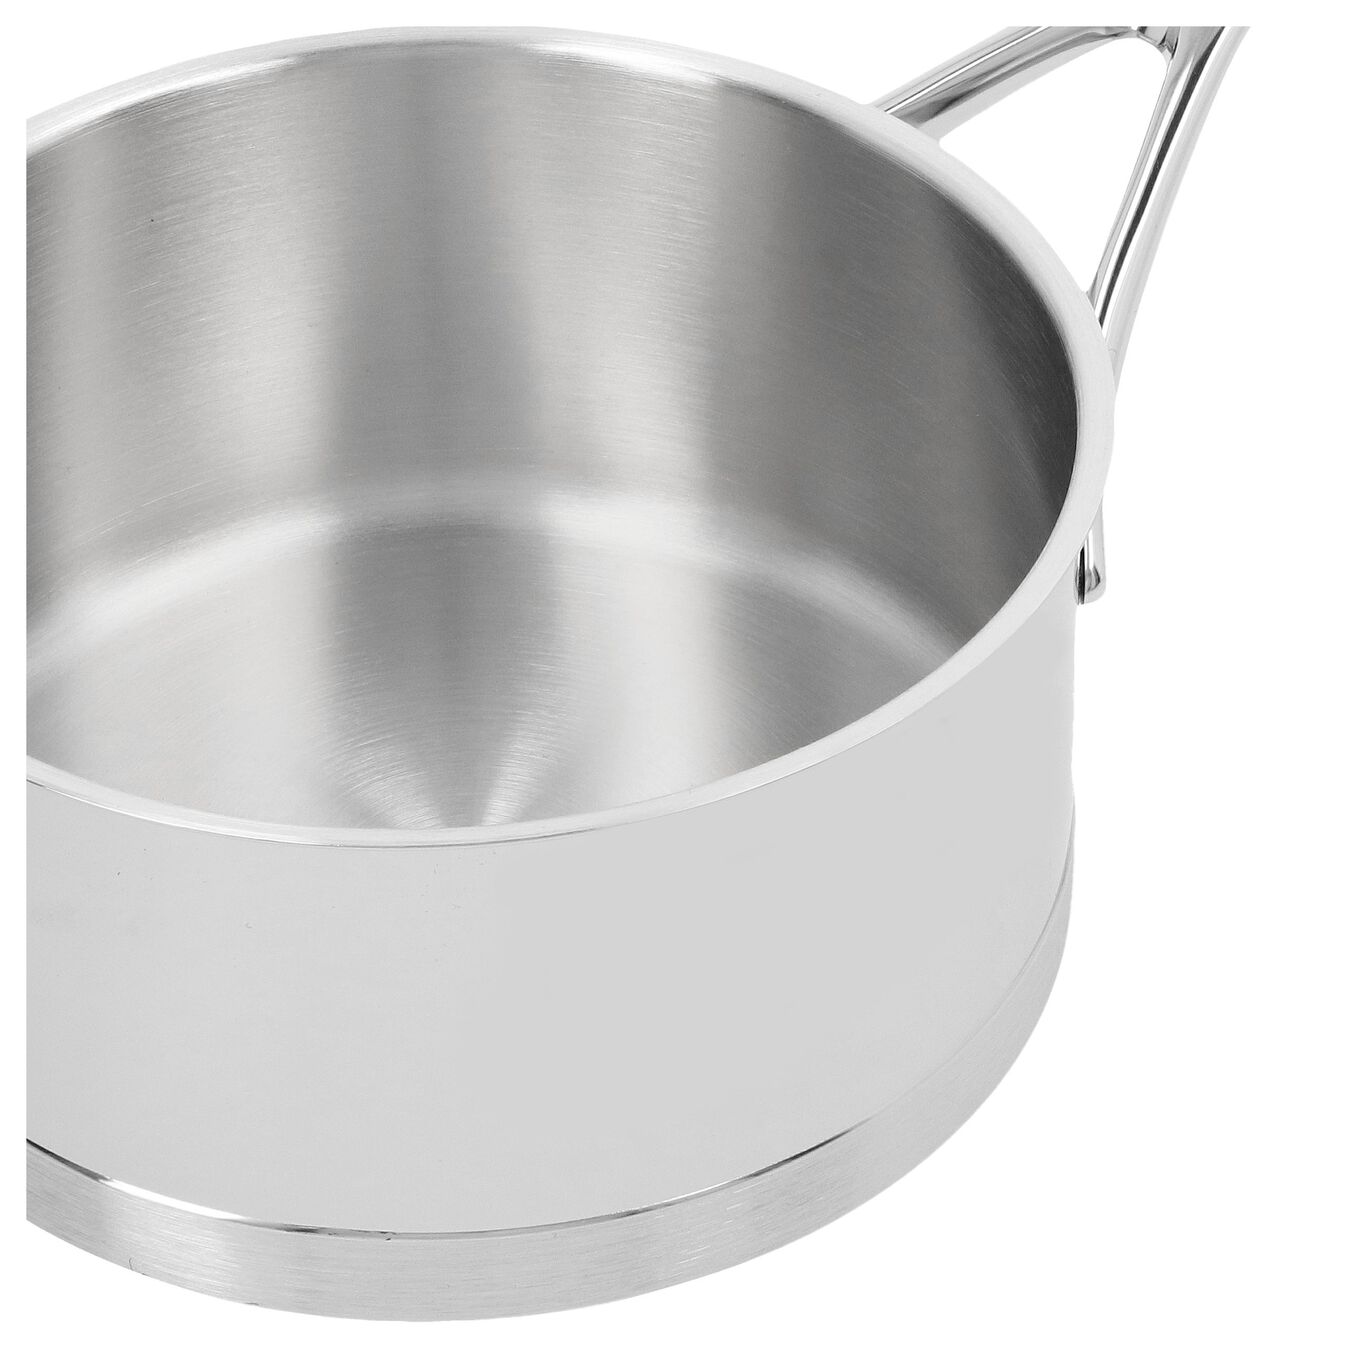 16 cm 18/10 Stainless Steel Saucepan without lid silver,,large 5